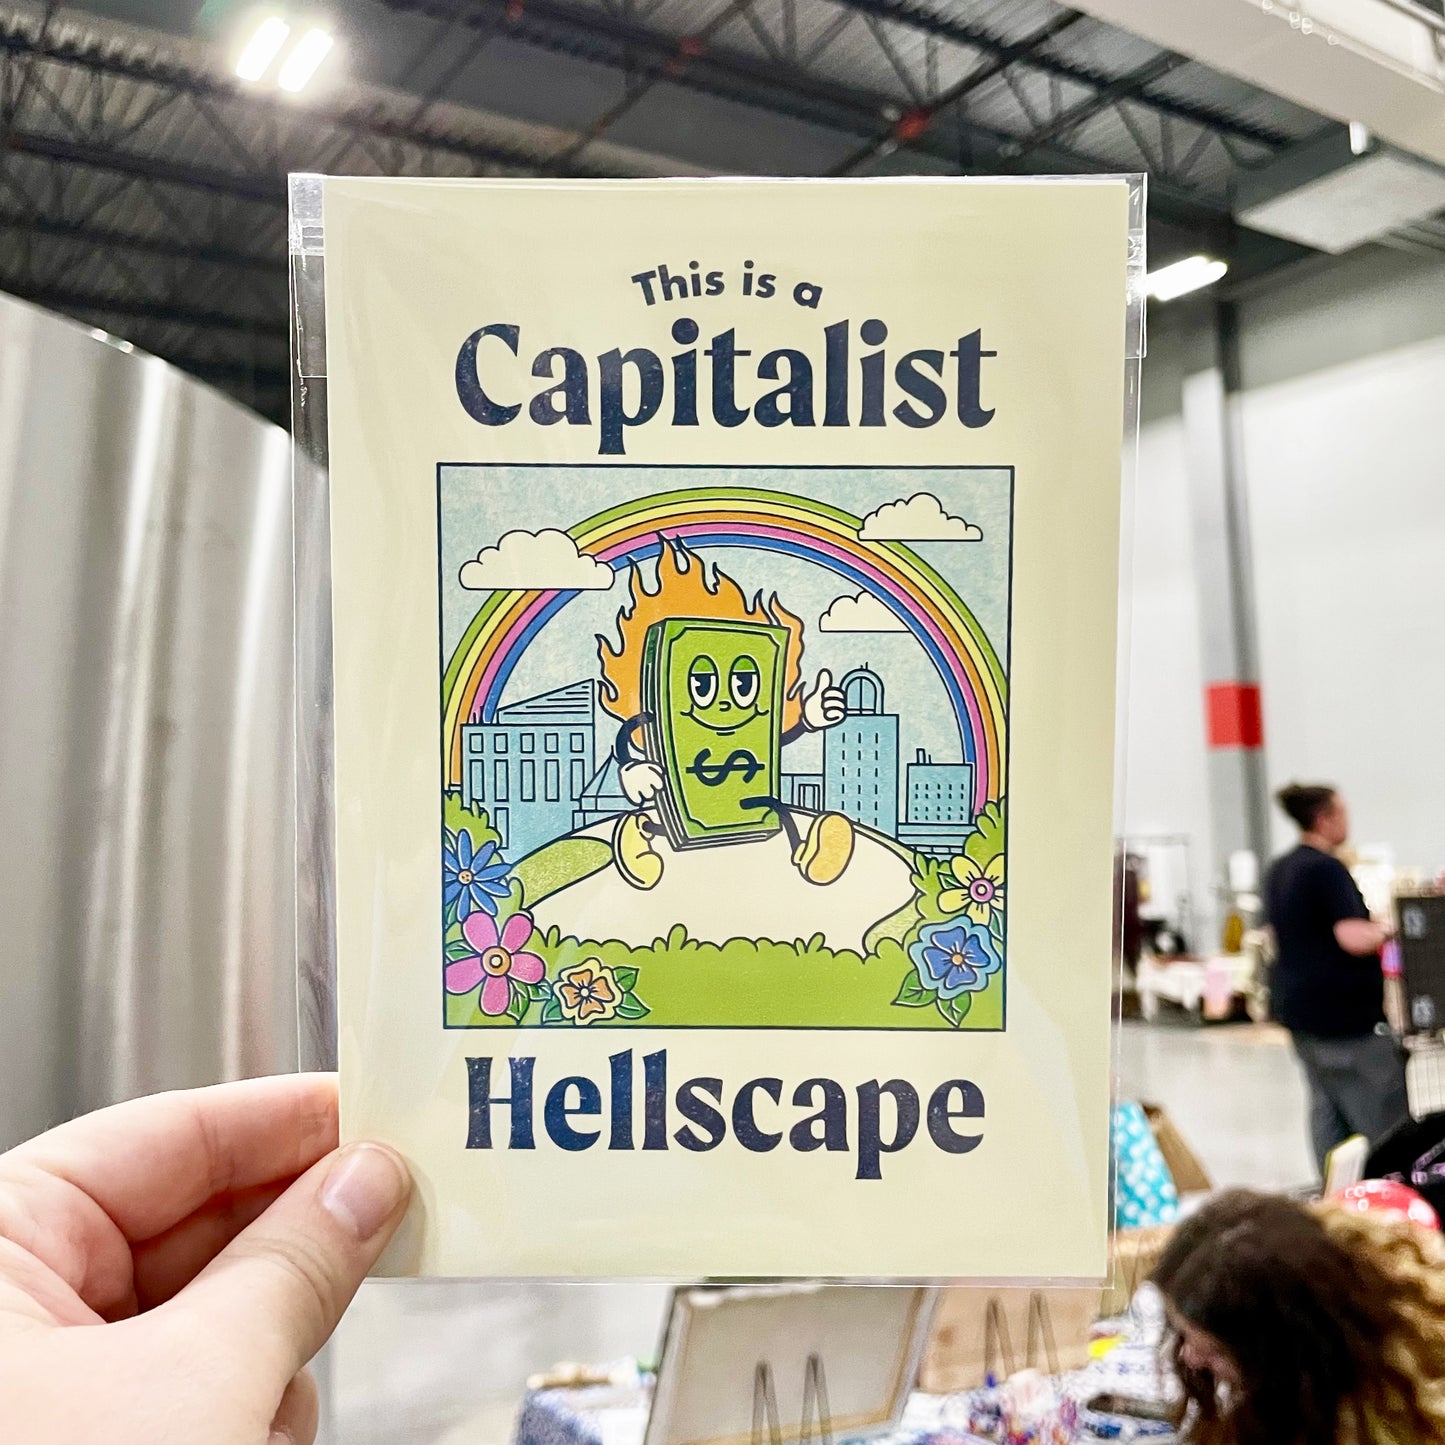 This is a Capitalist Hellscape 5x7 Greeting Card / Print